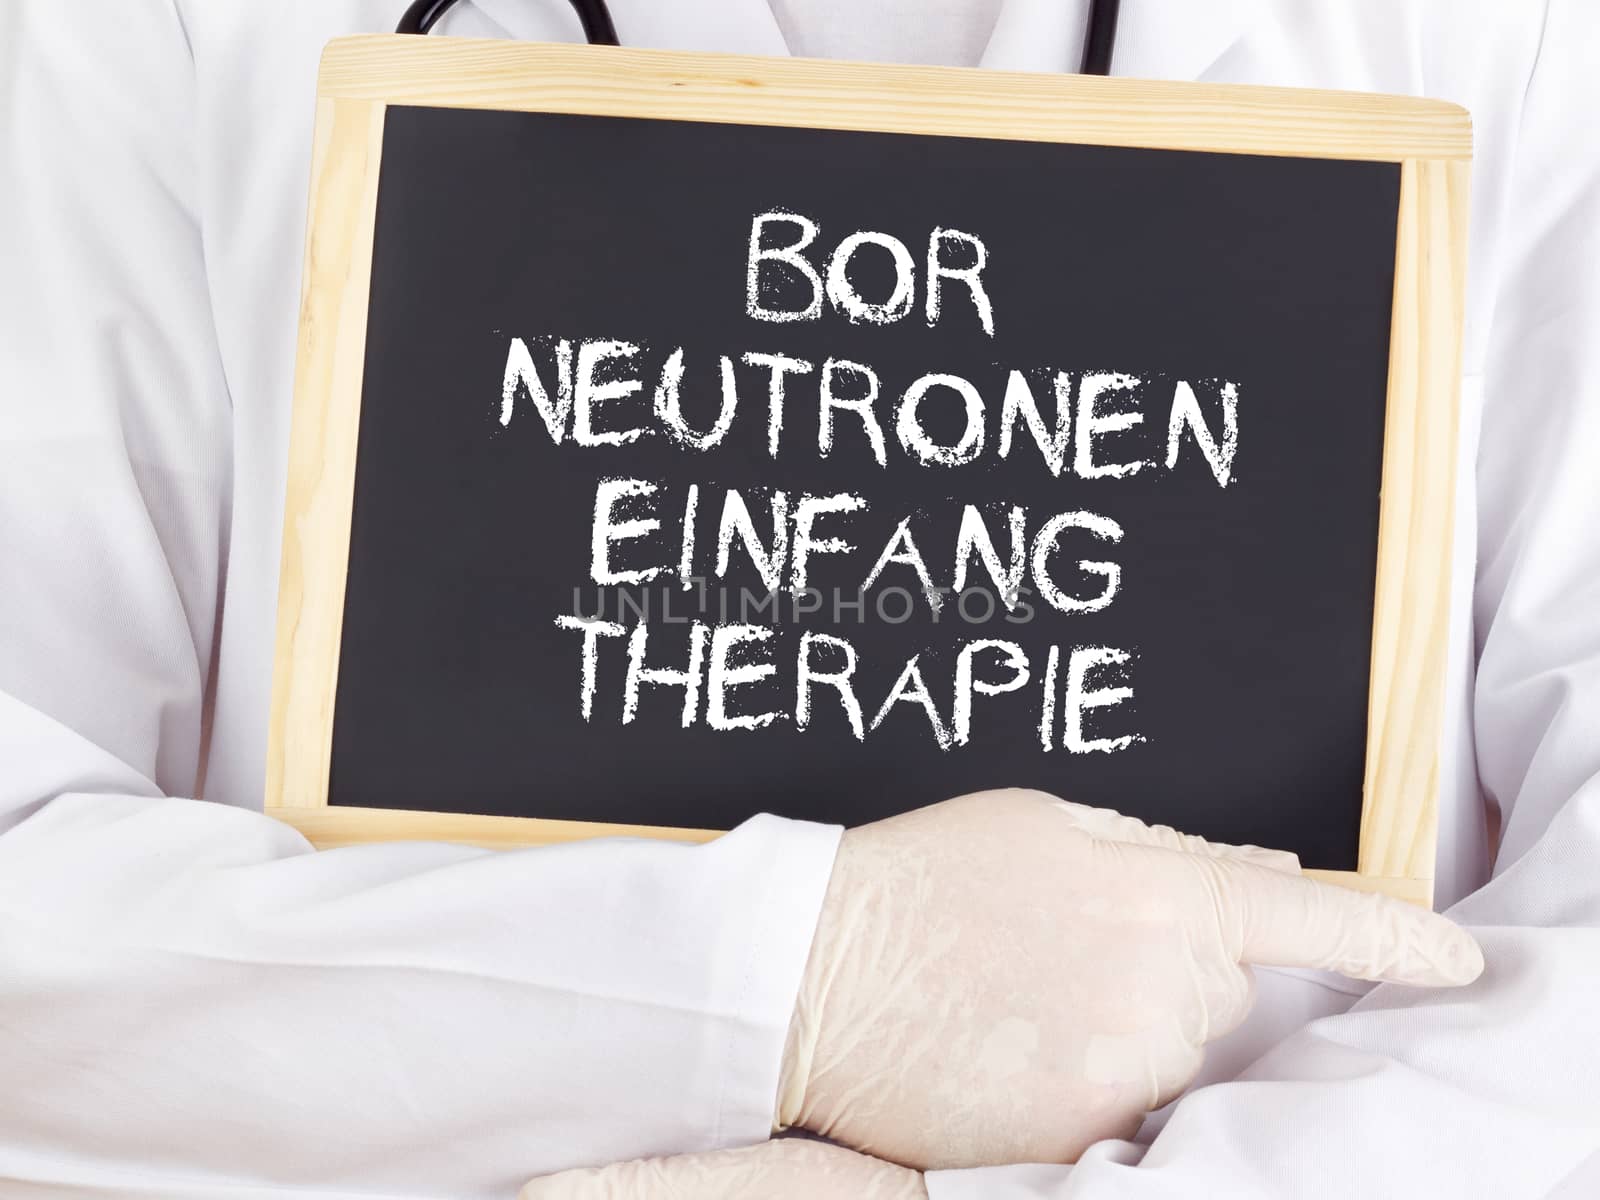 Doctor shows information: boron neutron capture therapy in german by gwolters